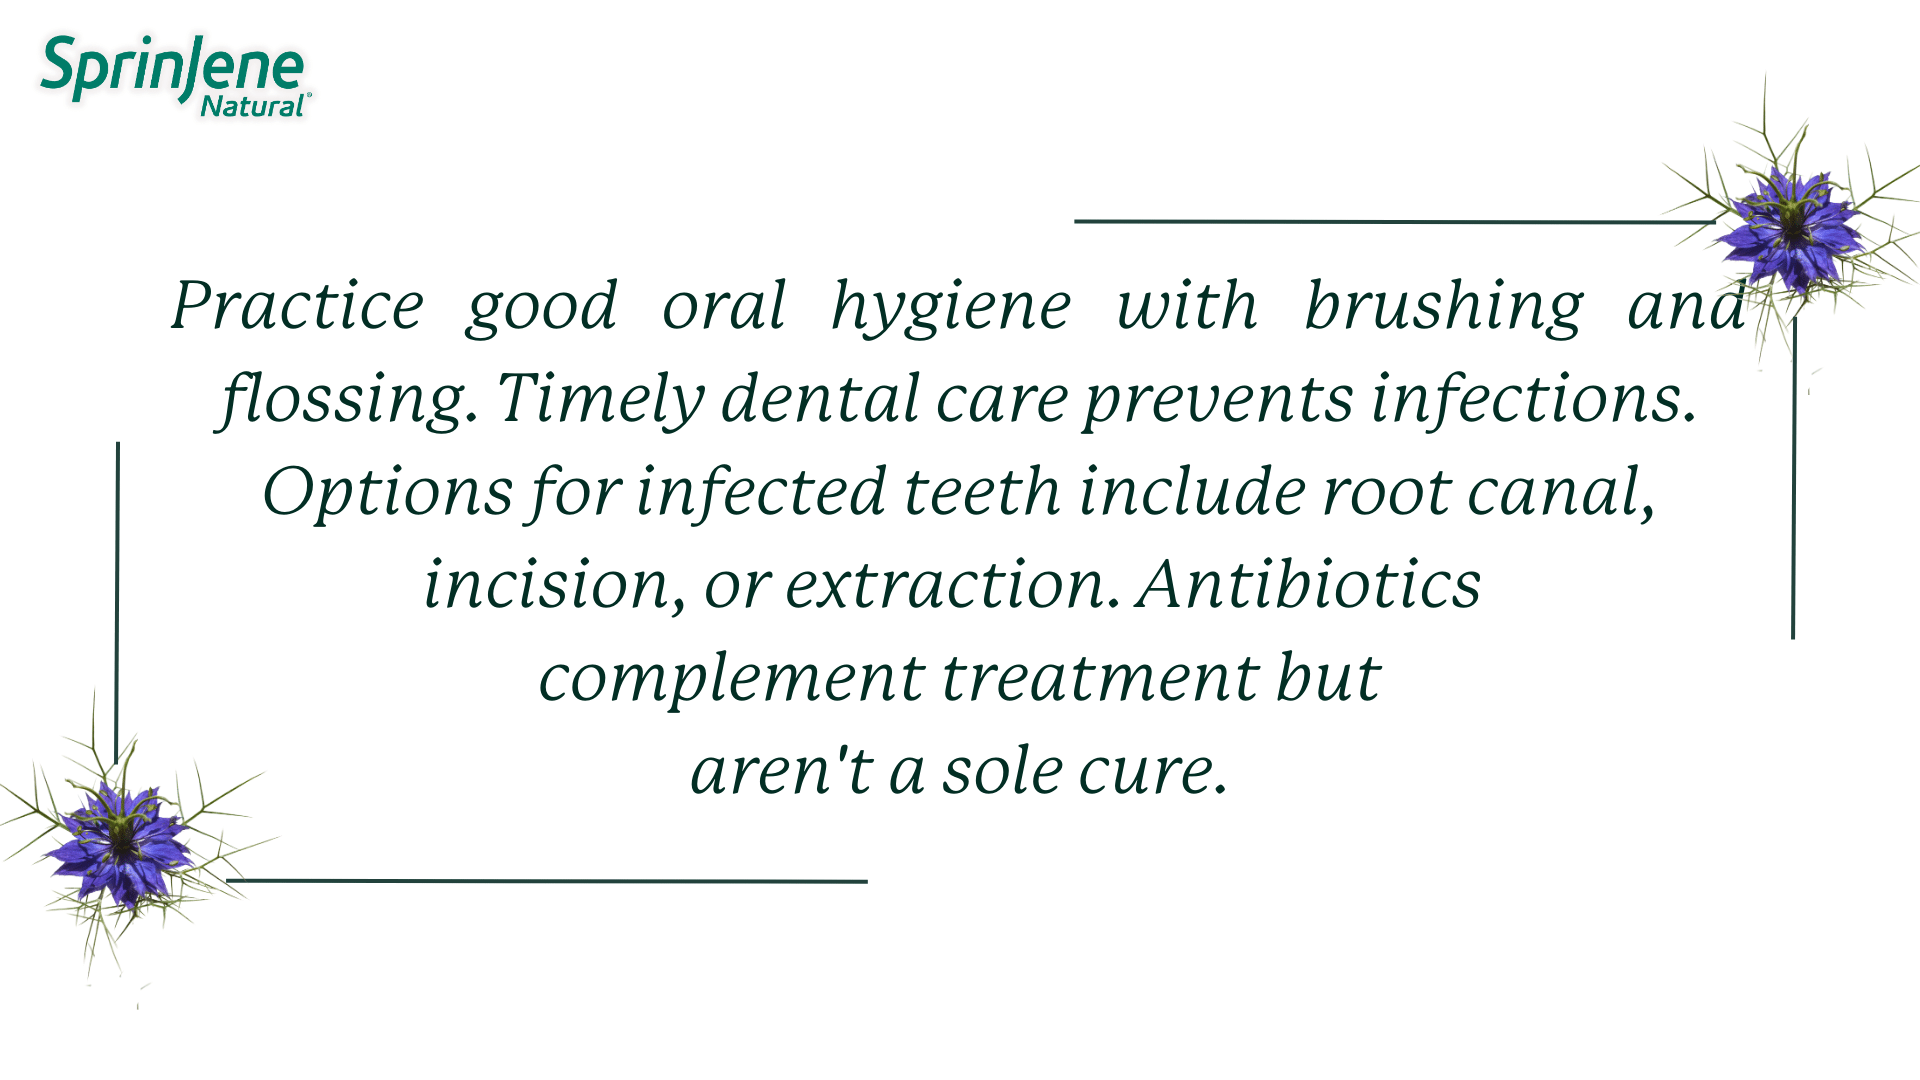 Practice   good   oral   hygiene   with   brushing   and flossing. Timely dental care prevents infections. Options for infected teeth include root canal, incision, or extraction. Antibiotics  complement treatment but aren't a sole cure.